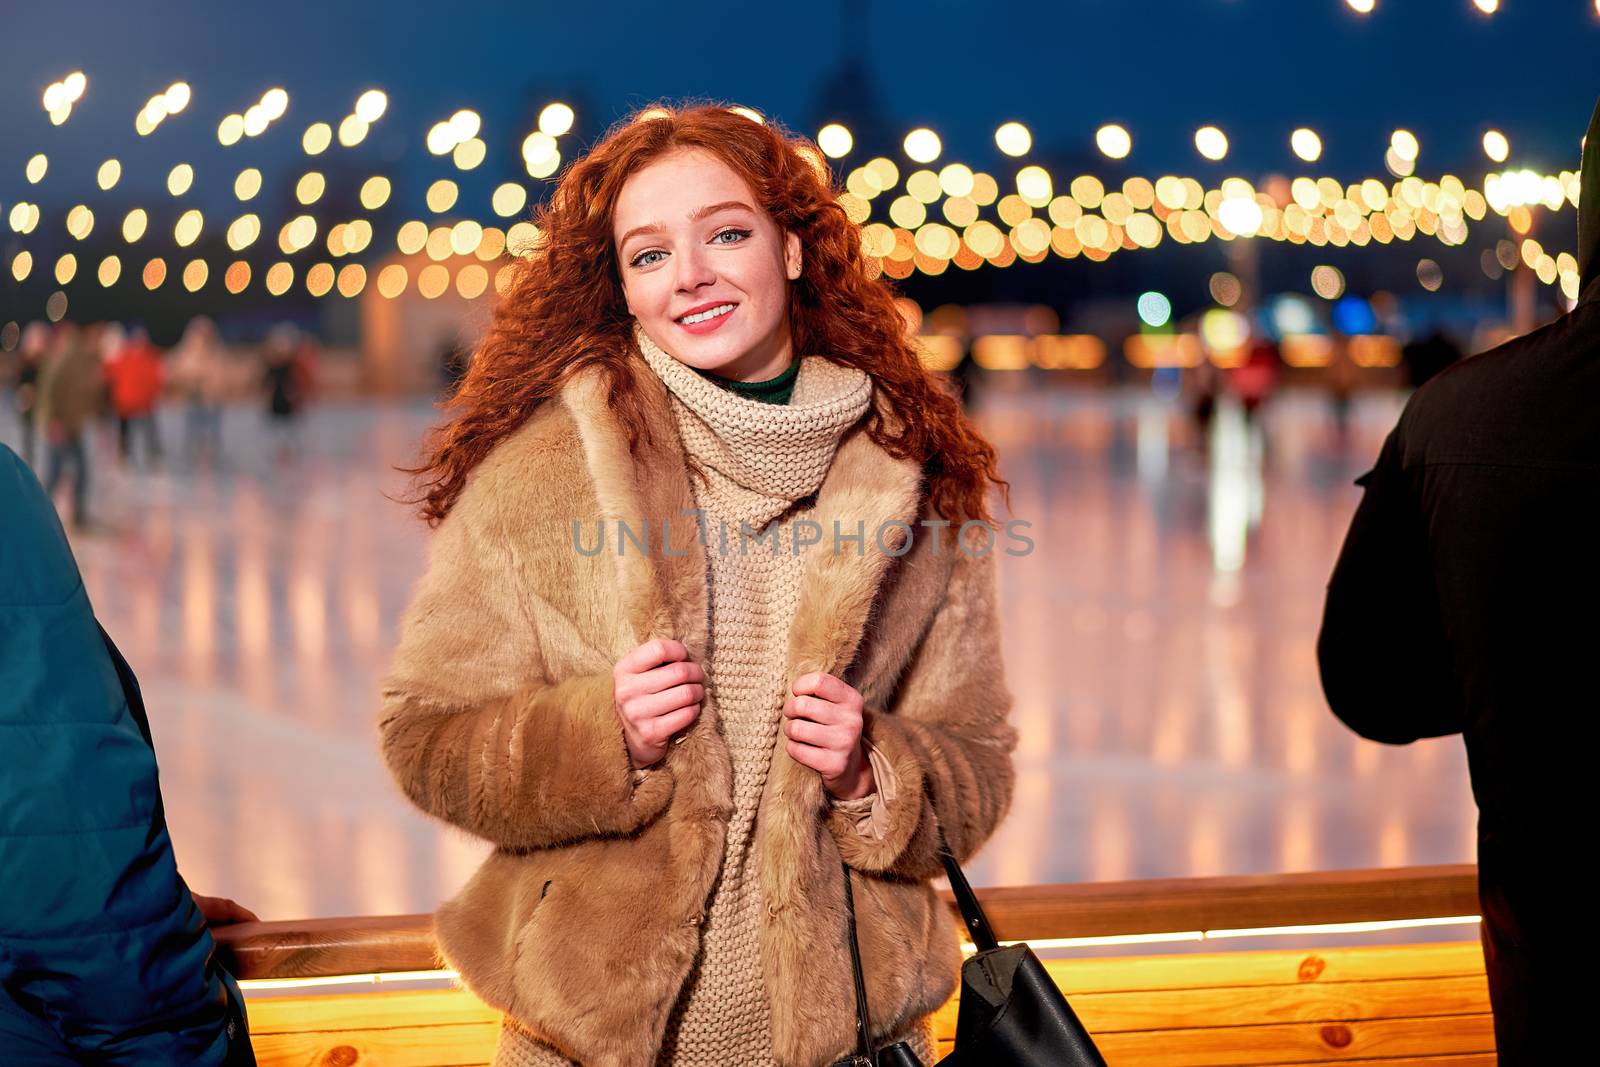 Young beautiful redhead girl freckles ice rink background Pretty woman curly hair portrait walking new year fair Modern cute female drink hot beverage mulled wine chrismas holiday decorated street.